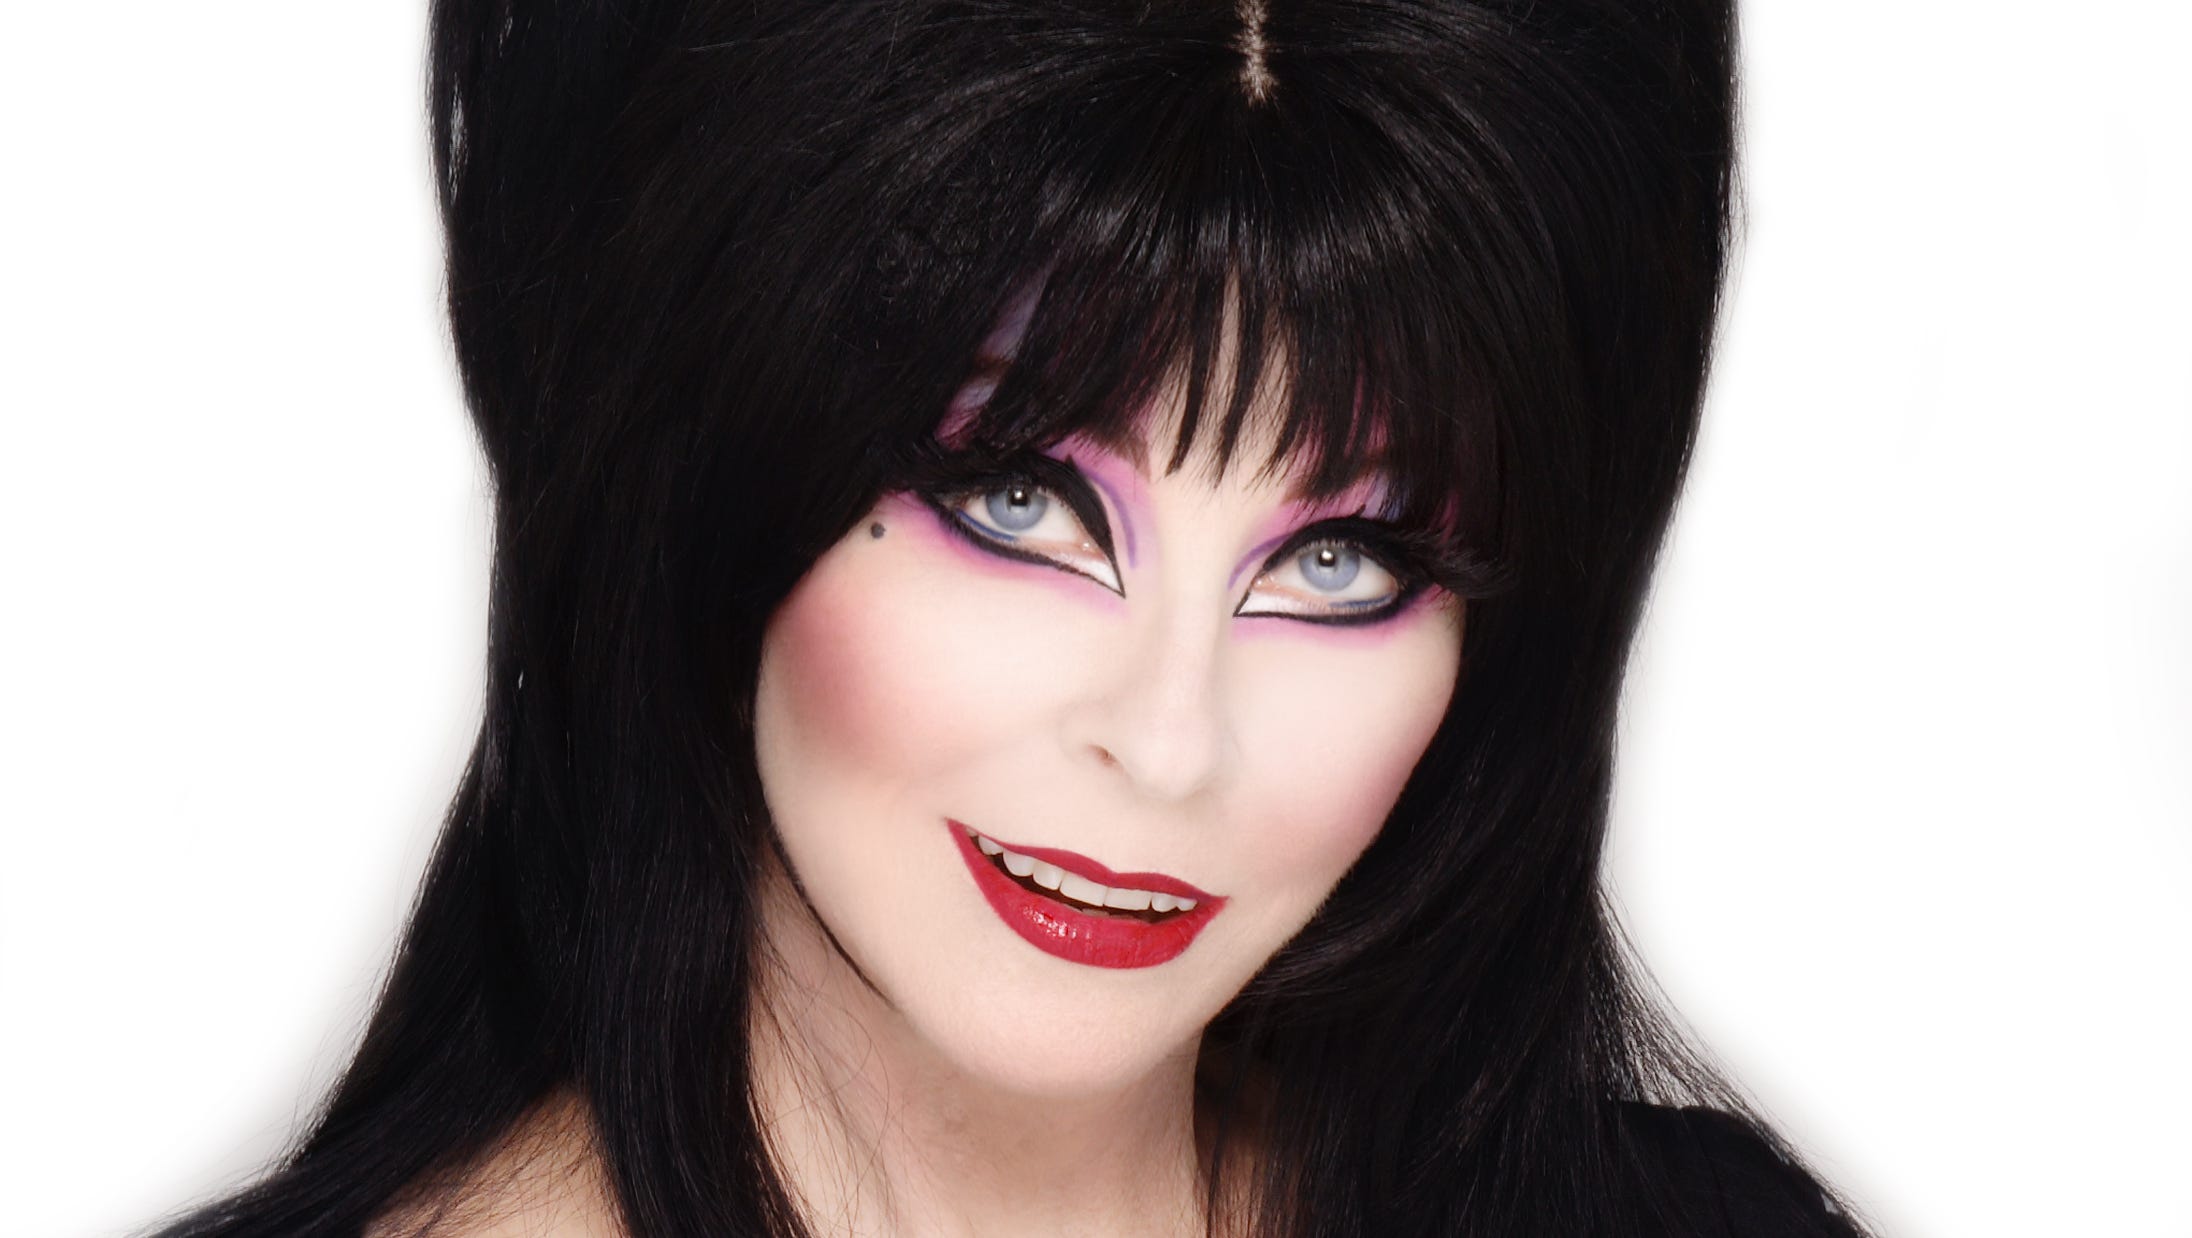 35 years later, Elvira's still spooky, sexy and funny